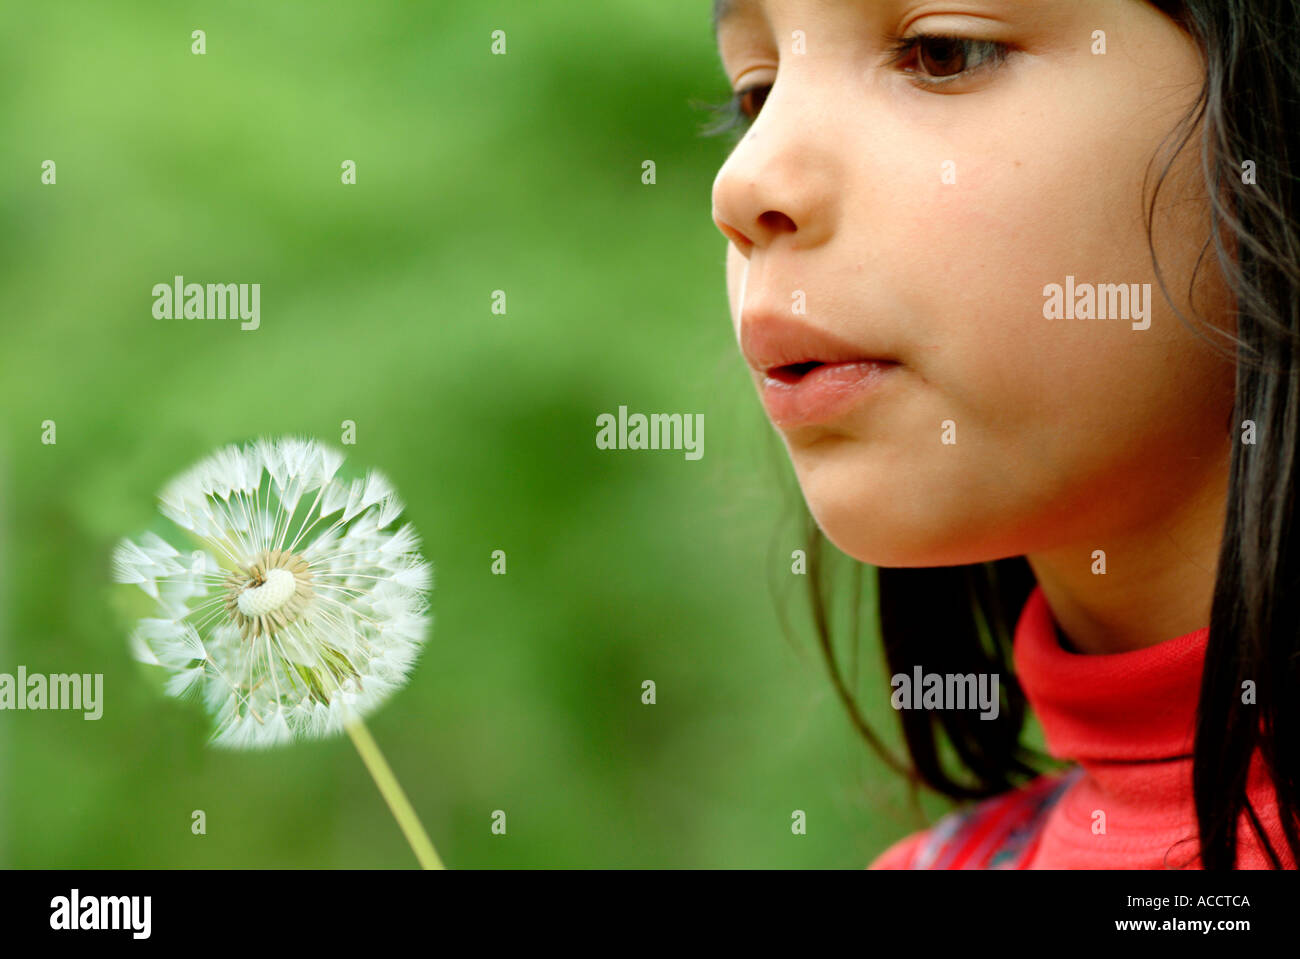 MR young dark haired girl in age of 6 years in nature blowing in a blowball Stock Photo